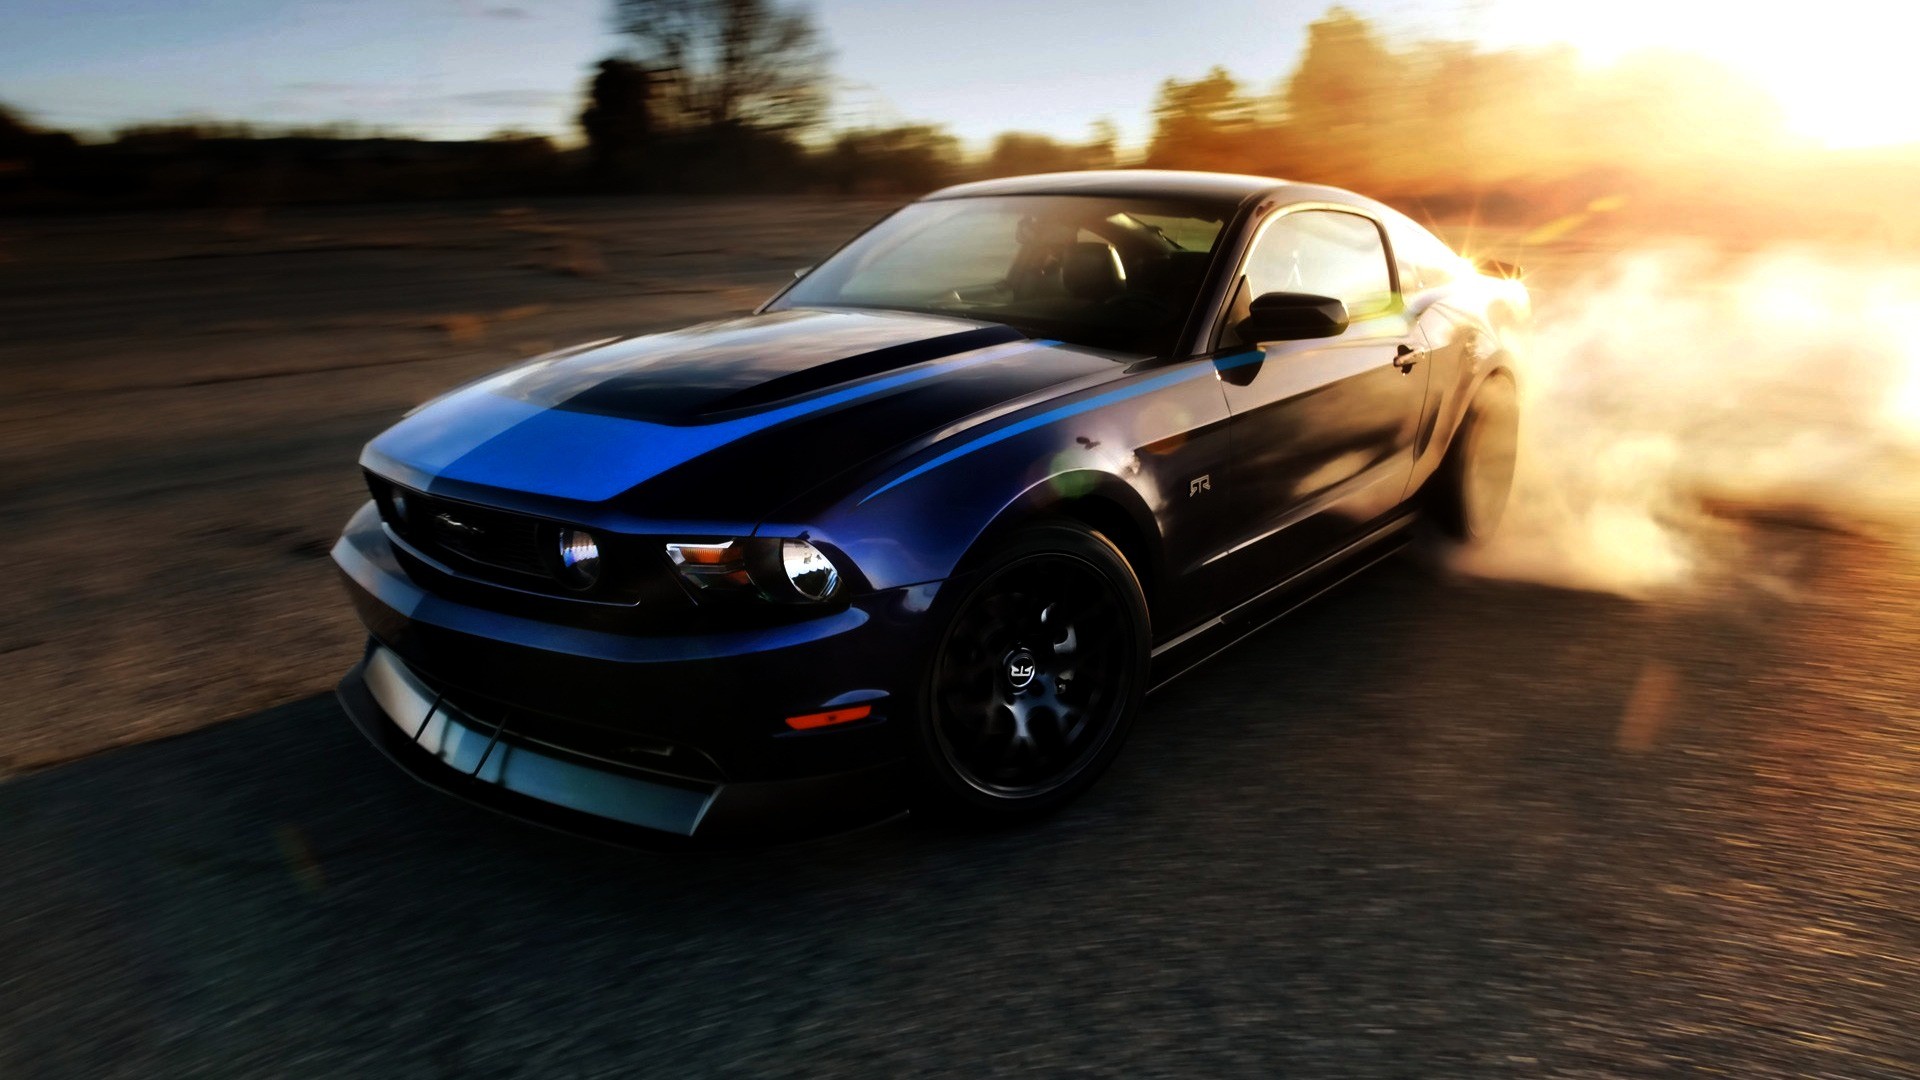 Wallpaper Cars Muscle Dust Ford Mustang Srt8